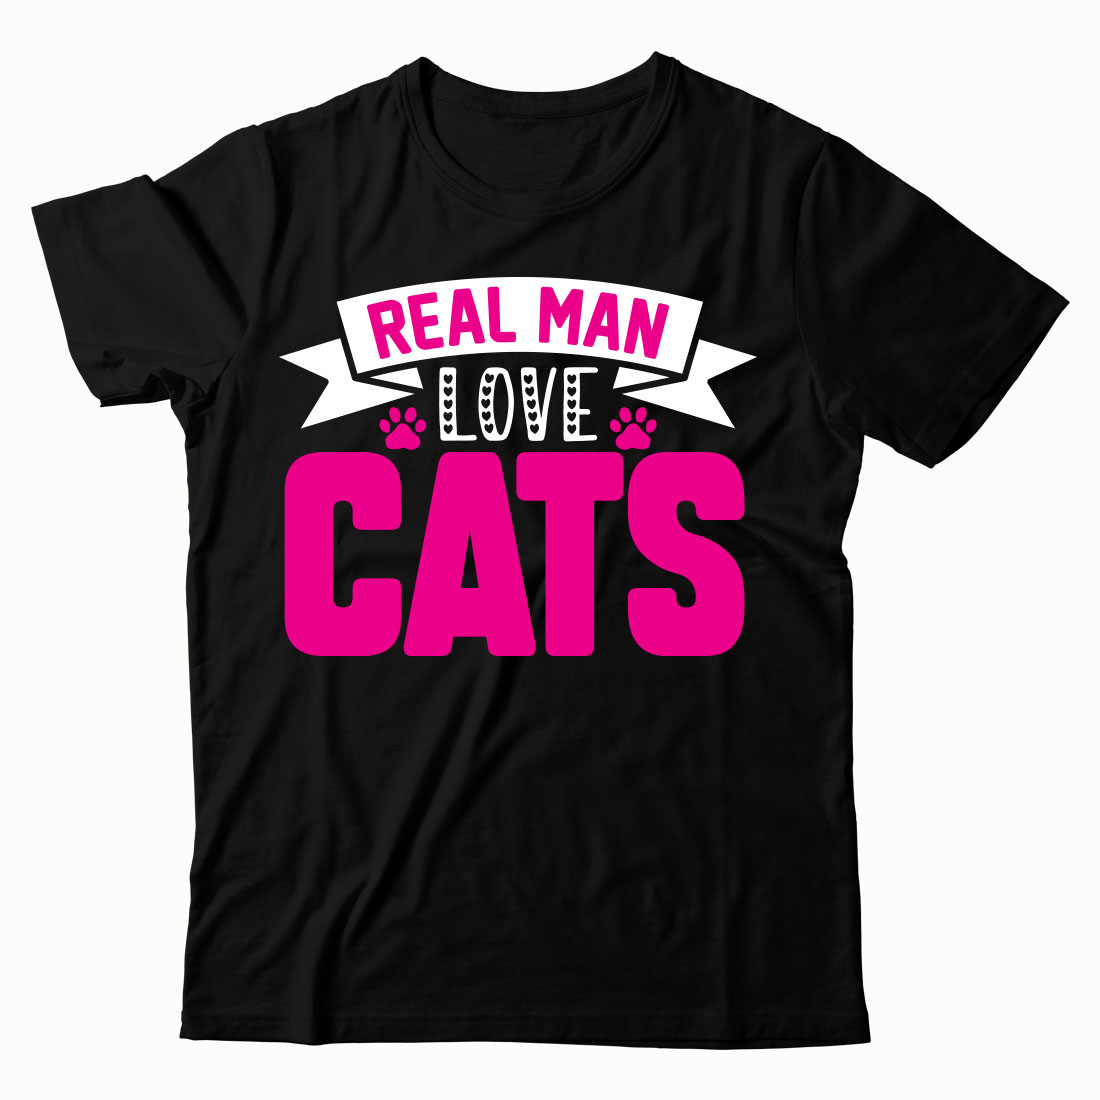 Black t - shirt with the words real man love cats on it.